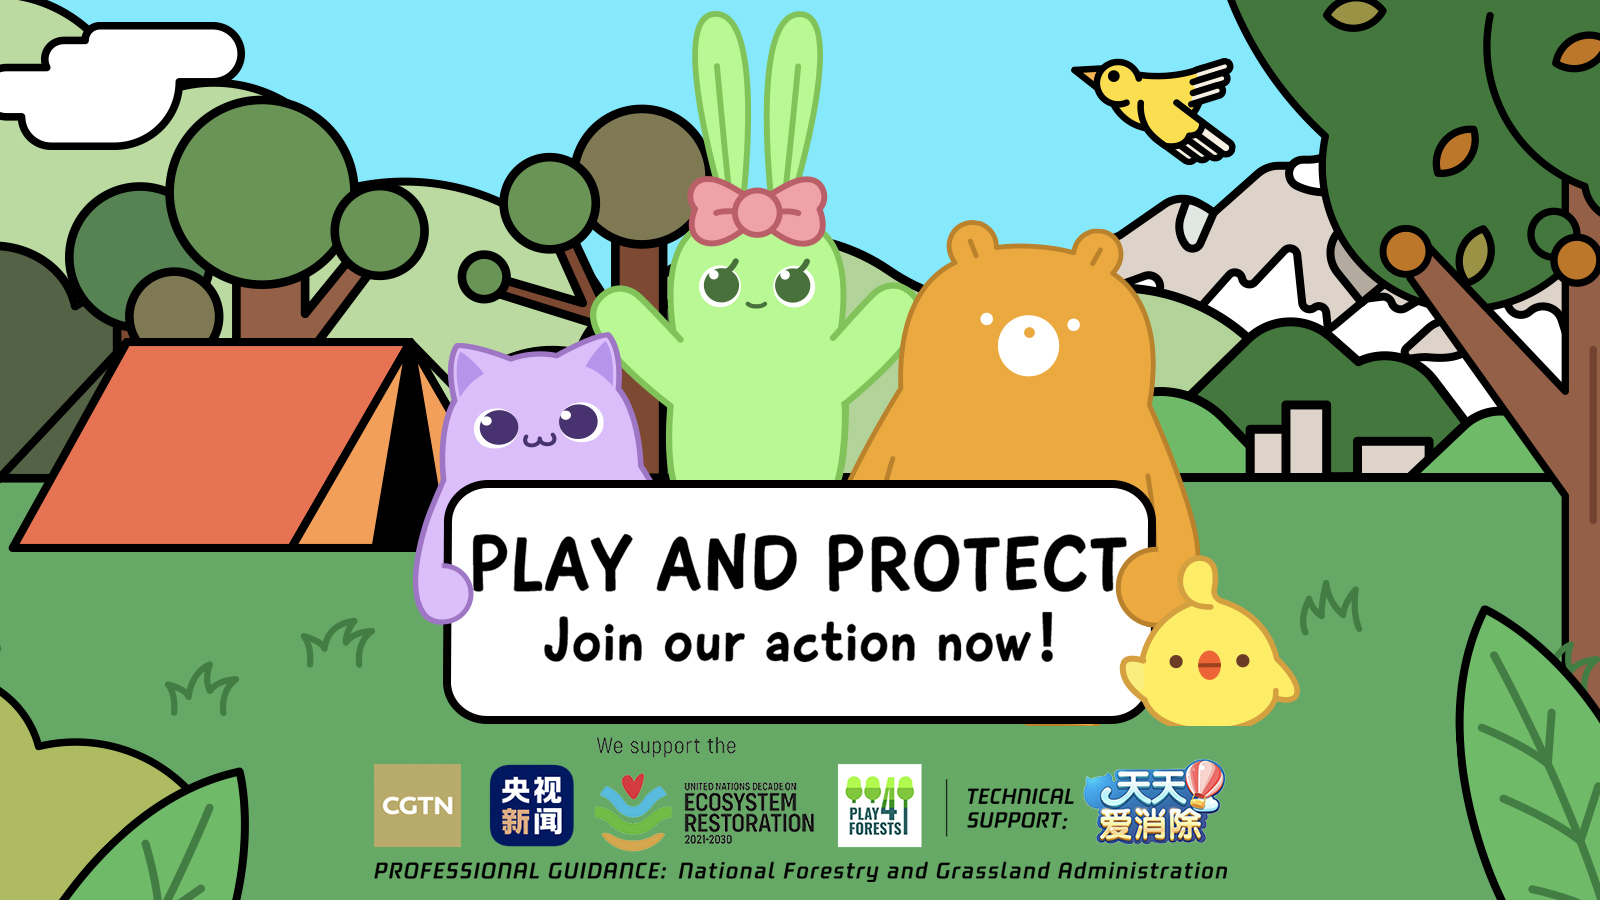 CGTN invites you to join our petition for biodiversity protection